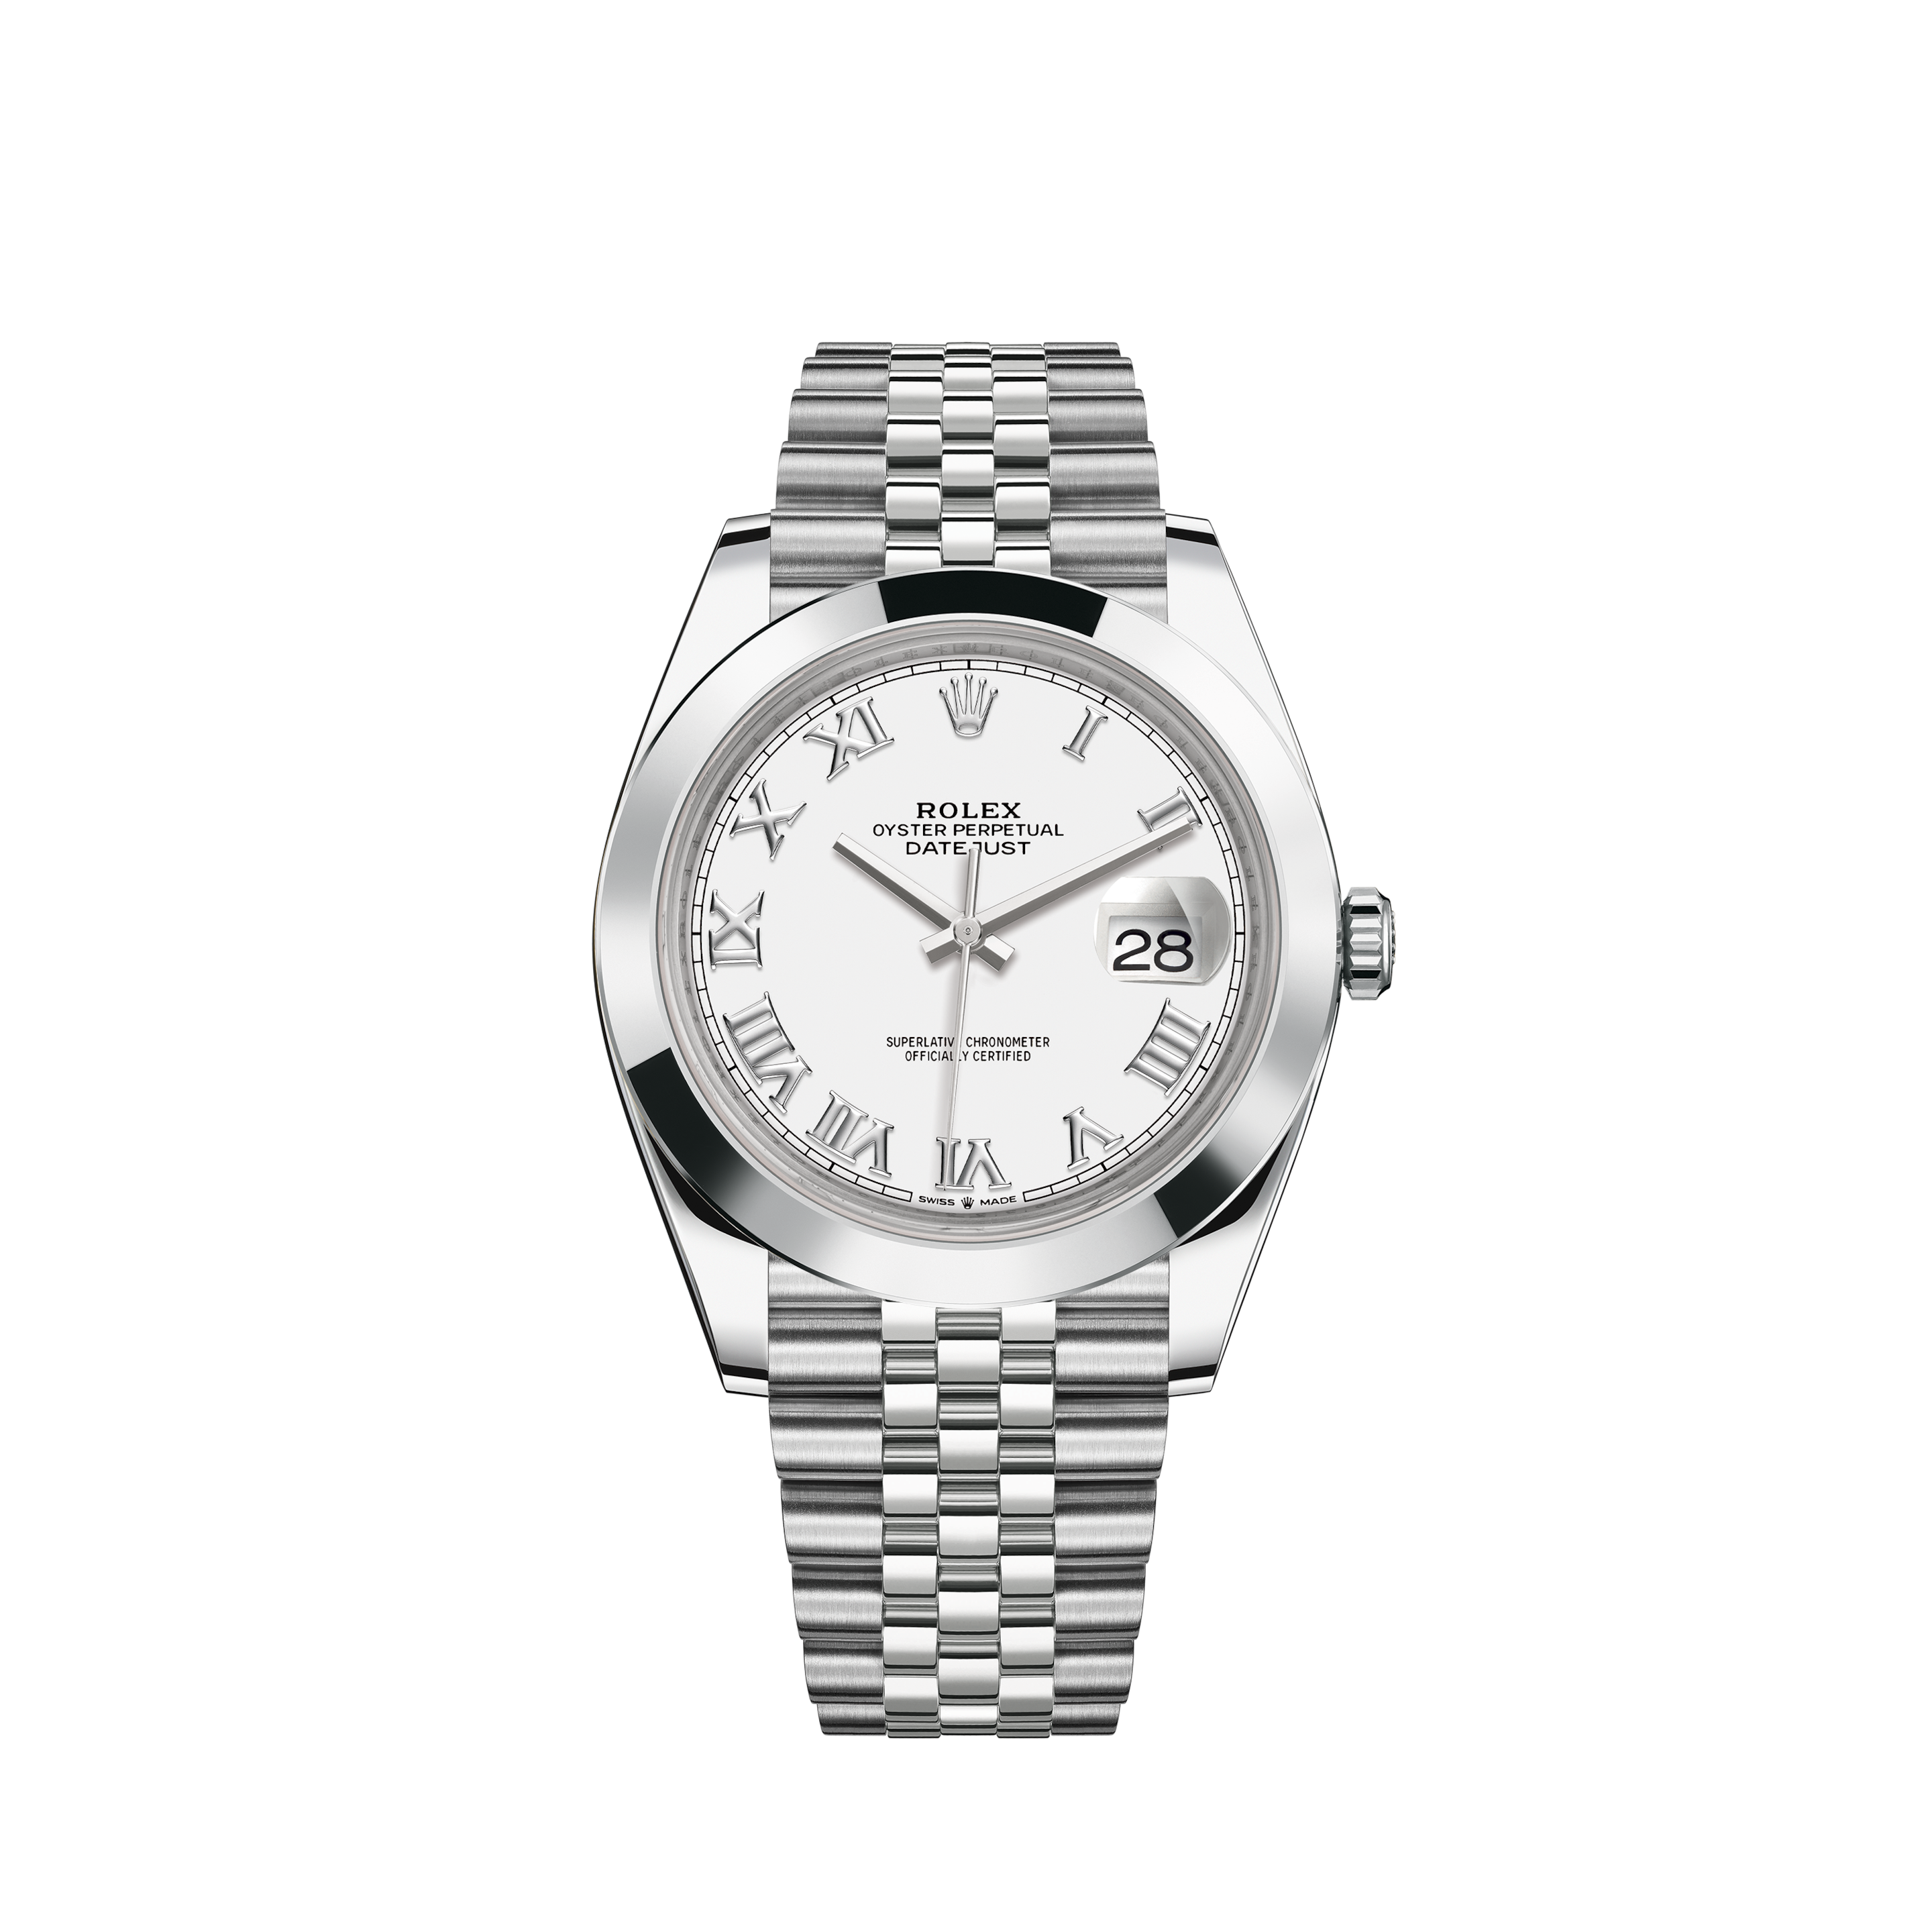 Rolex Mens 41mm Datejust II Stainless Steel Metallic Silver Dial with Diamond Accent iced out full Bracelet